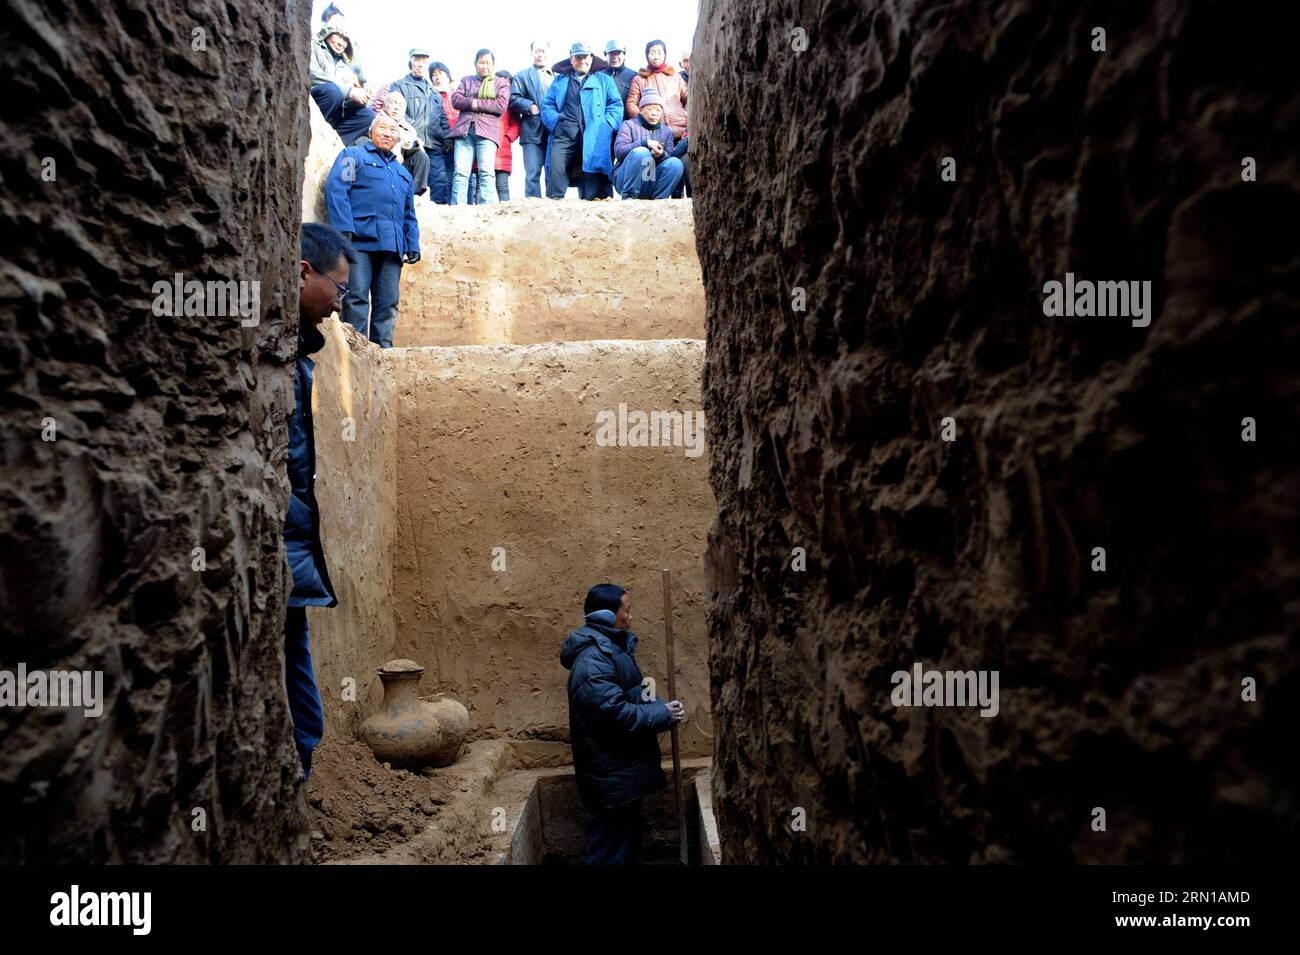 (141212) -- ZHENGZHOU,  Local people gather at the excavating spot of ancient relics of the Han Dynasty (202 BC-220 AD), in Wenxian County, central China s Henan Province, Dec. 11, 2014. ) (wf) CHINA-HENAN-ARCHAEOLOGY(CN) ZhuxXiang PUBLICATIONxNOTxINxCHN   Zhengzhou Local Celebrities gather AT The Excavating Spot of Ancient Relics of The Han Dynasty 202 BC 220 Retired in Wenxian County Central China S Henan Province DEC 11 2014 WF China Henan Archaeology CN ZhuxXiang PUBLICATIONxNOTxINxCHN Stock Photo